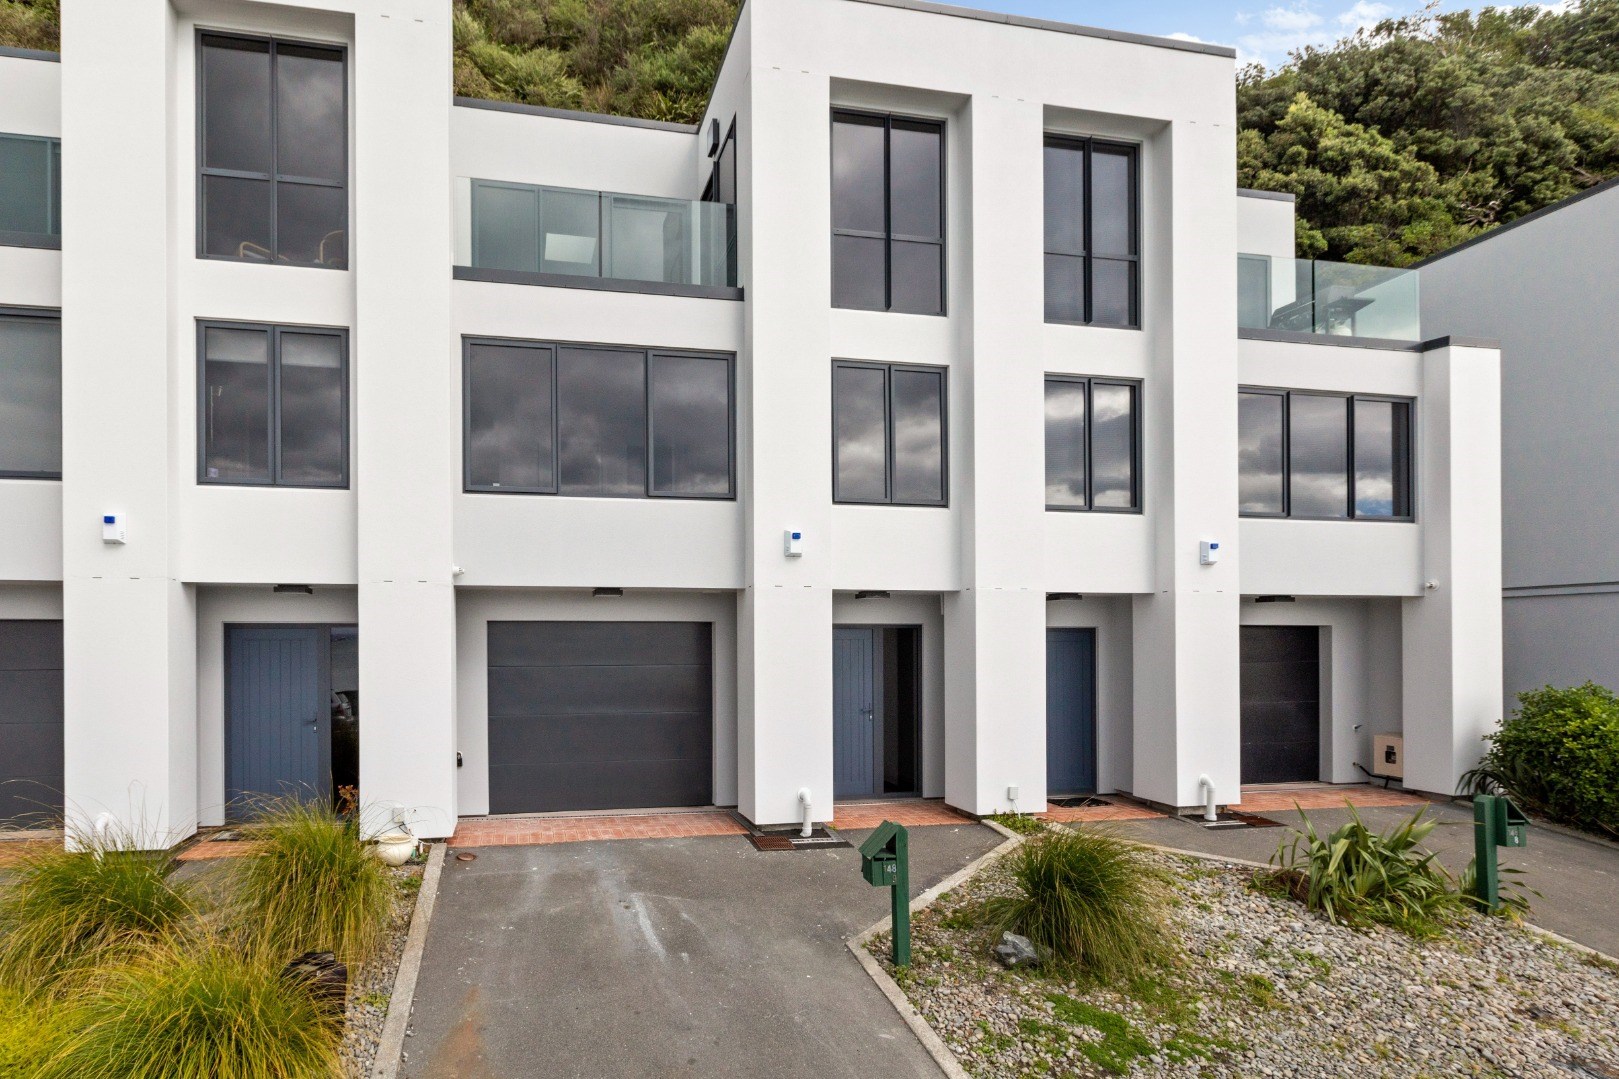 Real Estate For Rent Houses & Apartments : Stunning Waterfront Home, Wellington